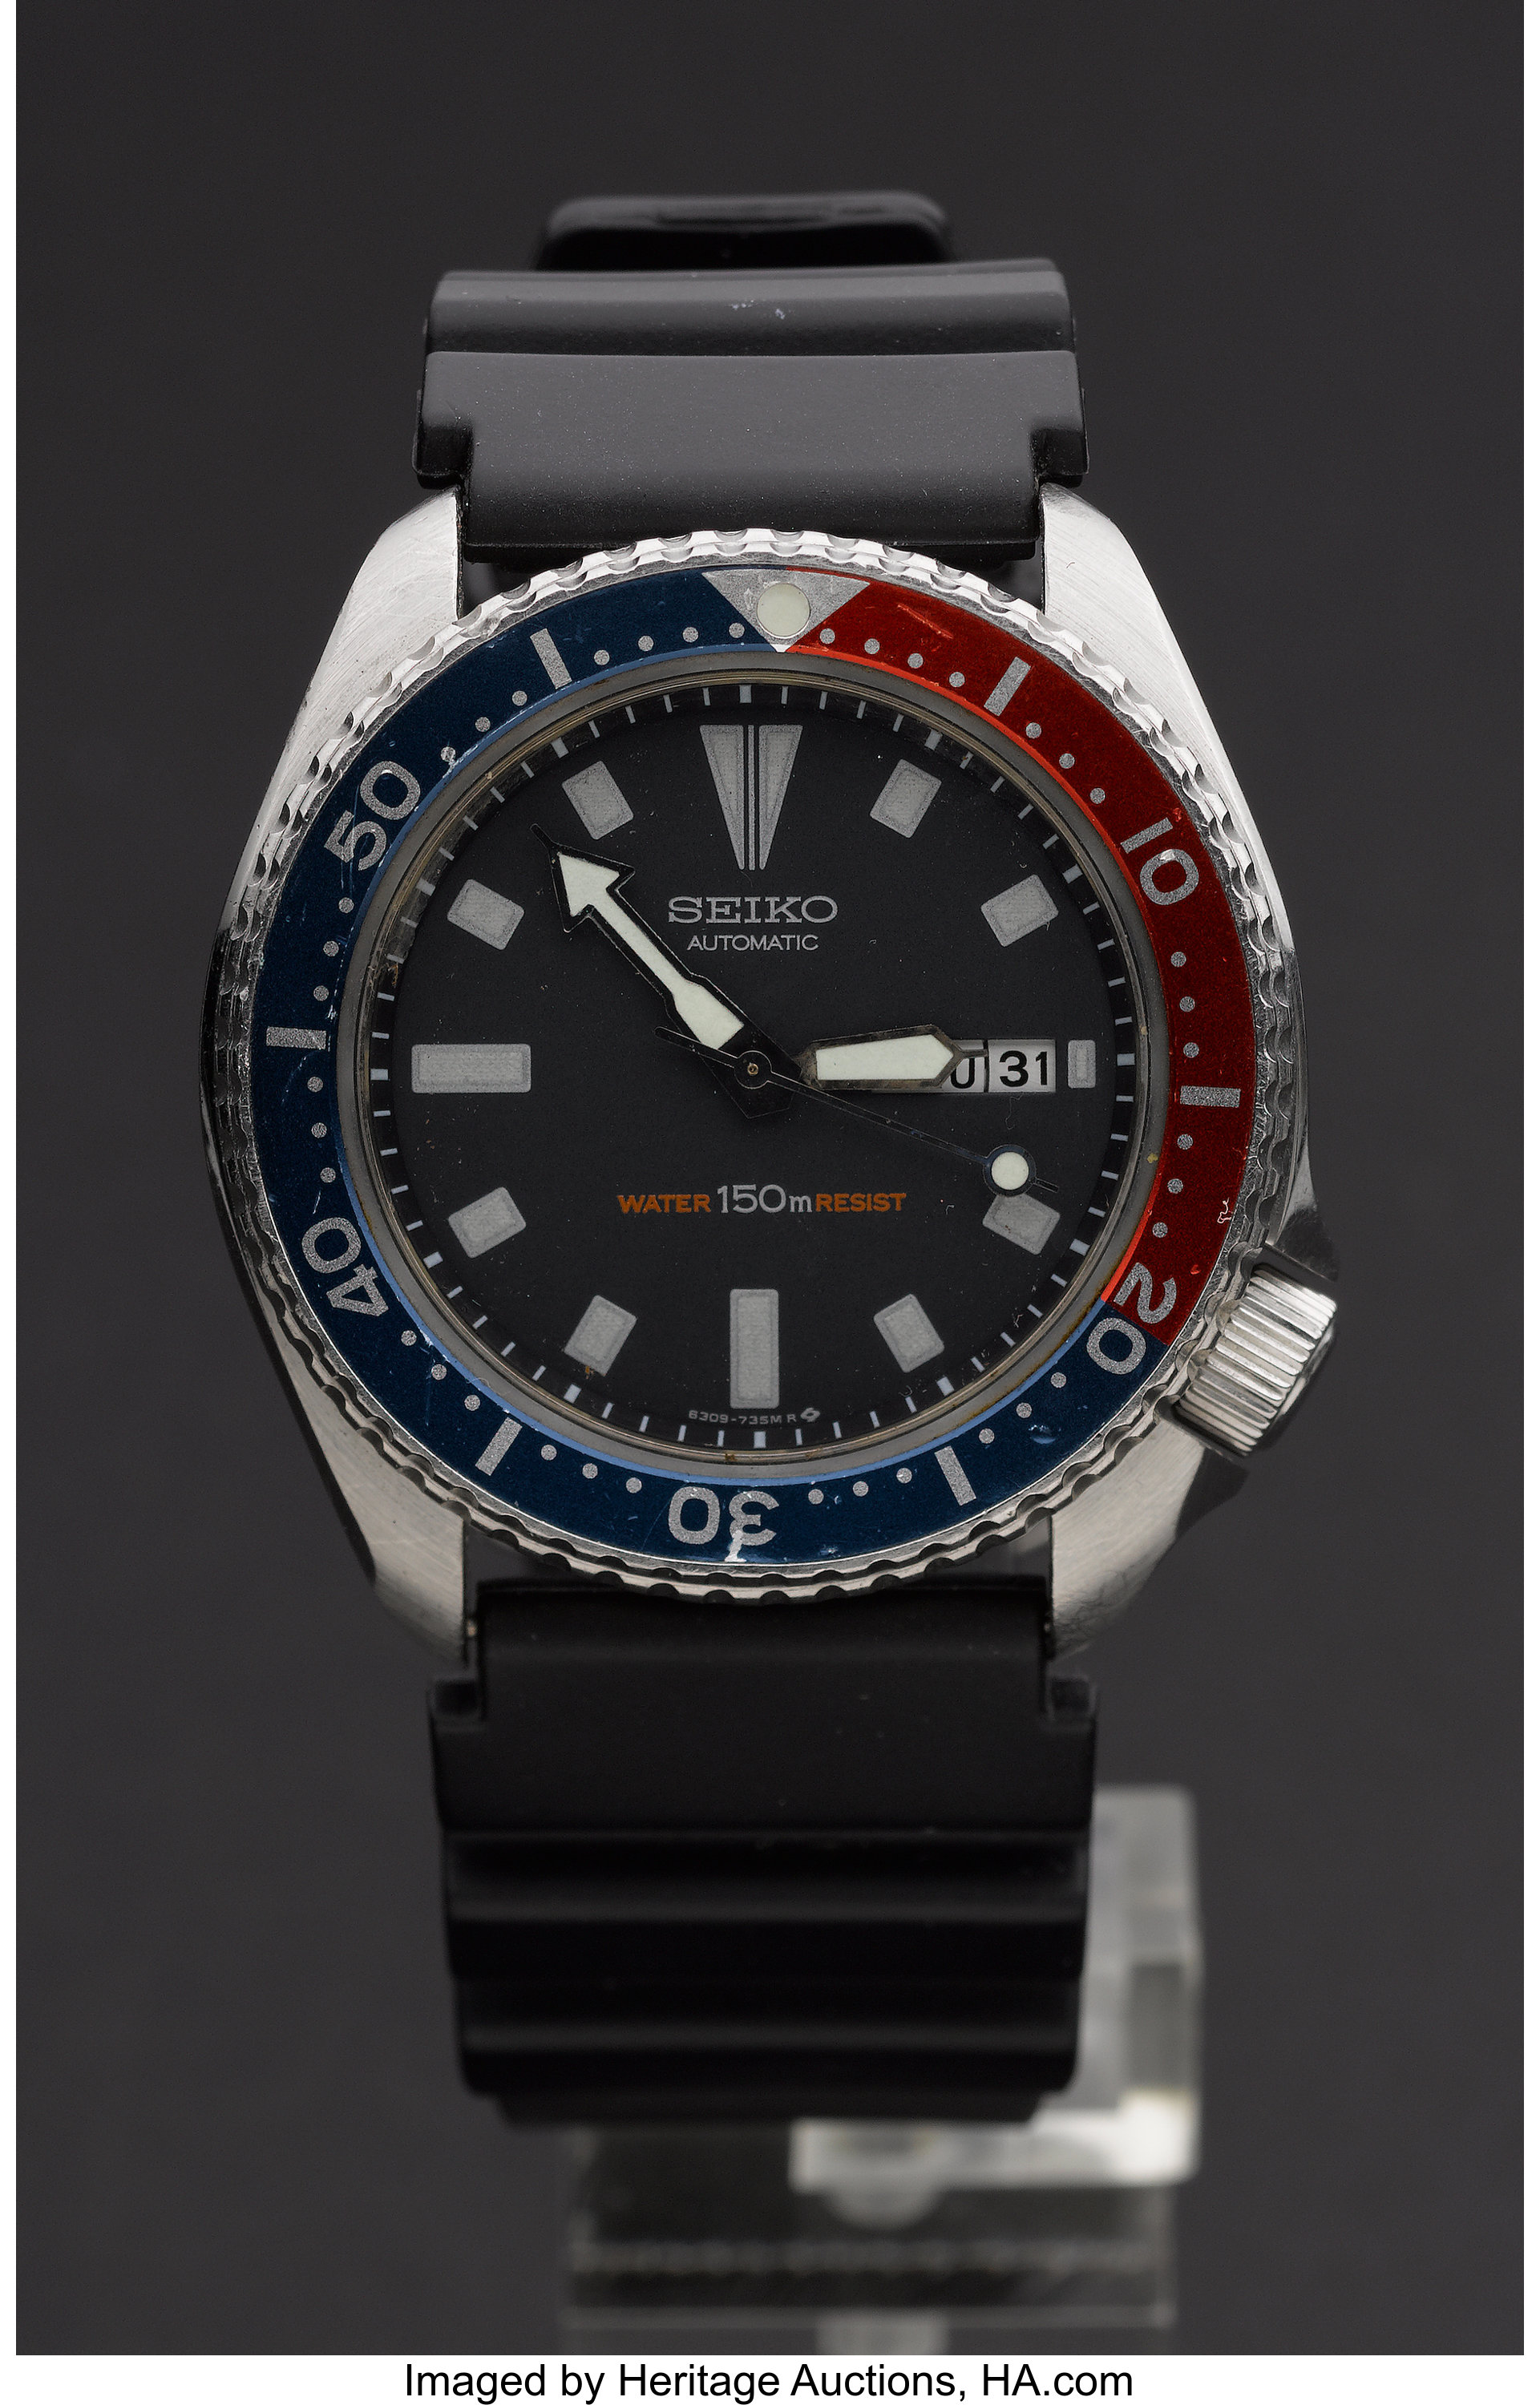 Seiko 6309-729A Steel Automatic Diver's Watch. ... Timepieces | Lot #70017  | Heritage Auctions